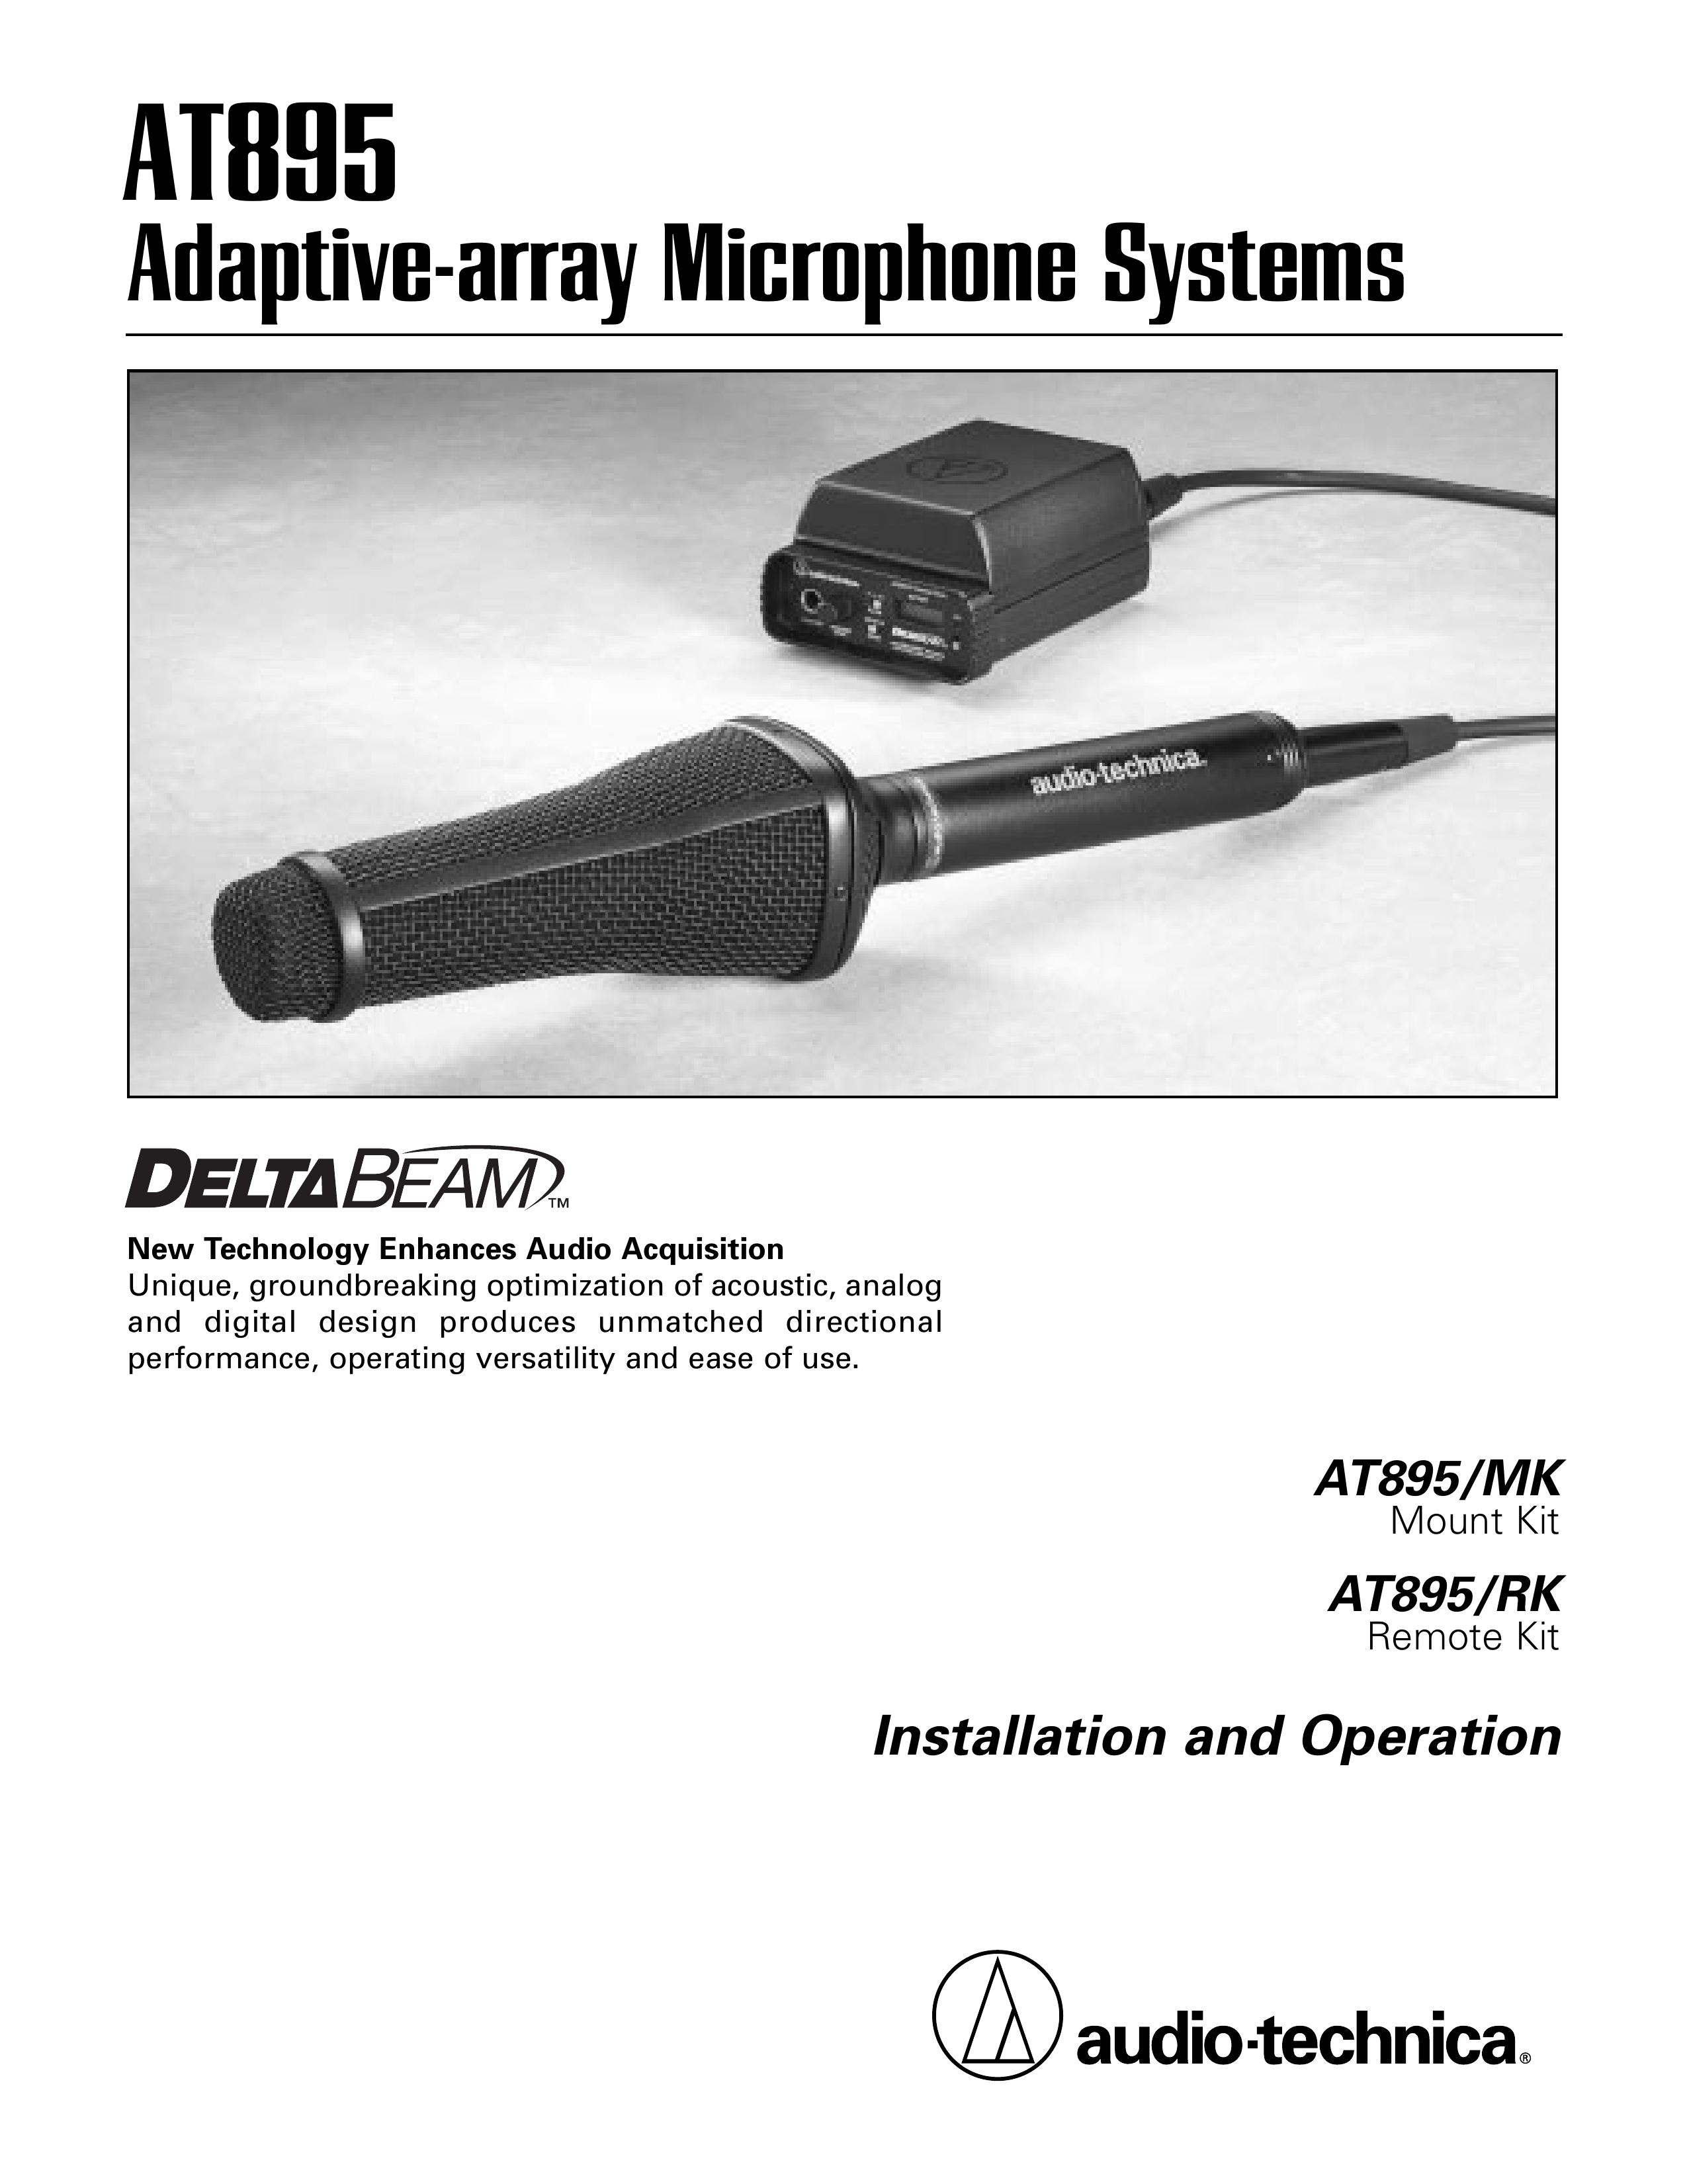 Audio-Technica AT895 Microphone User Manual